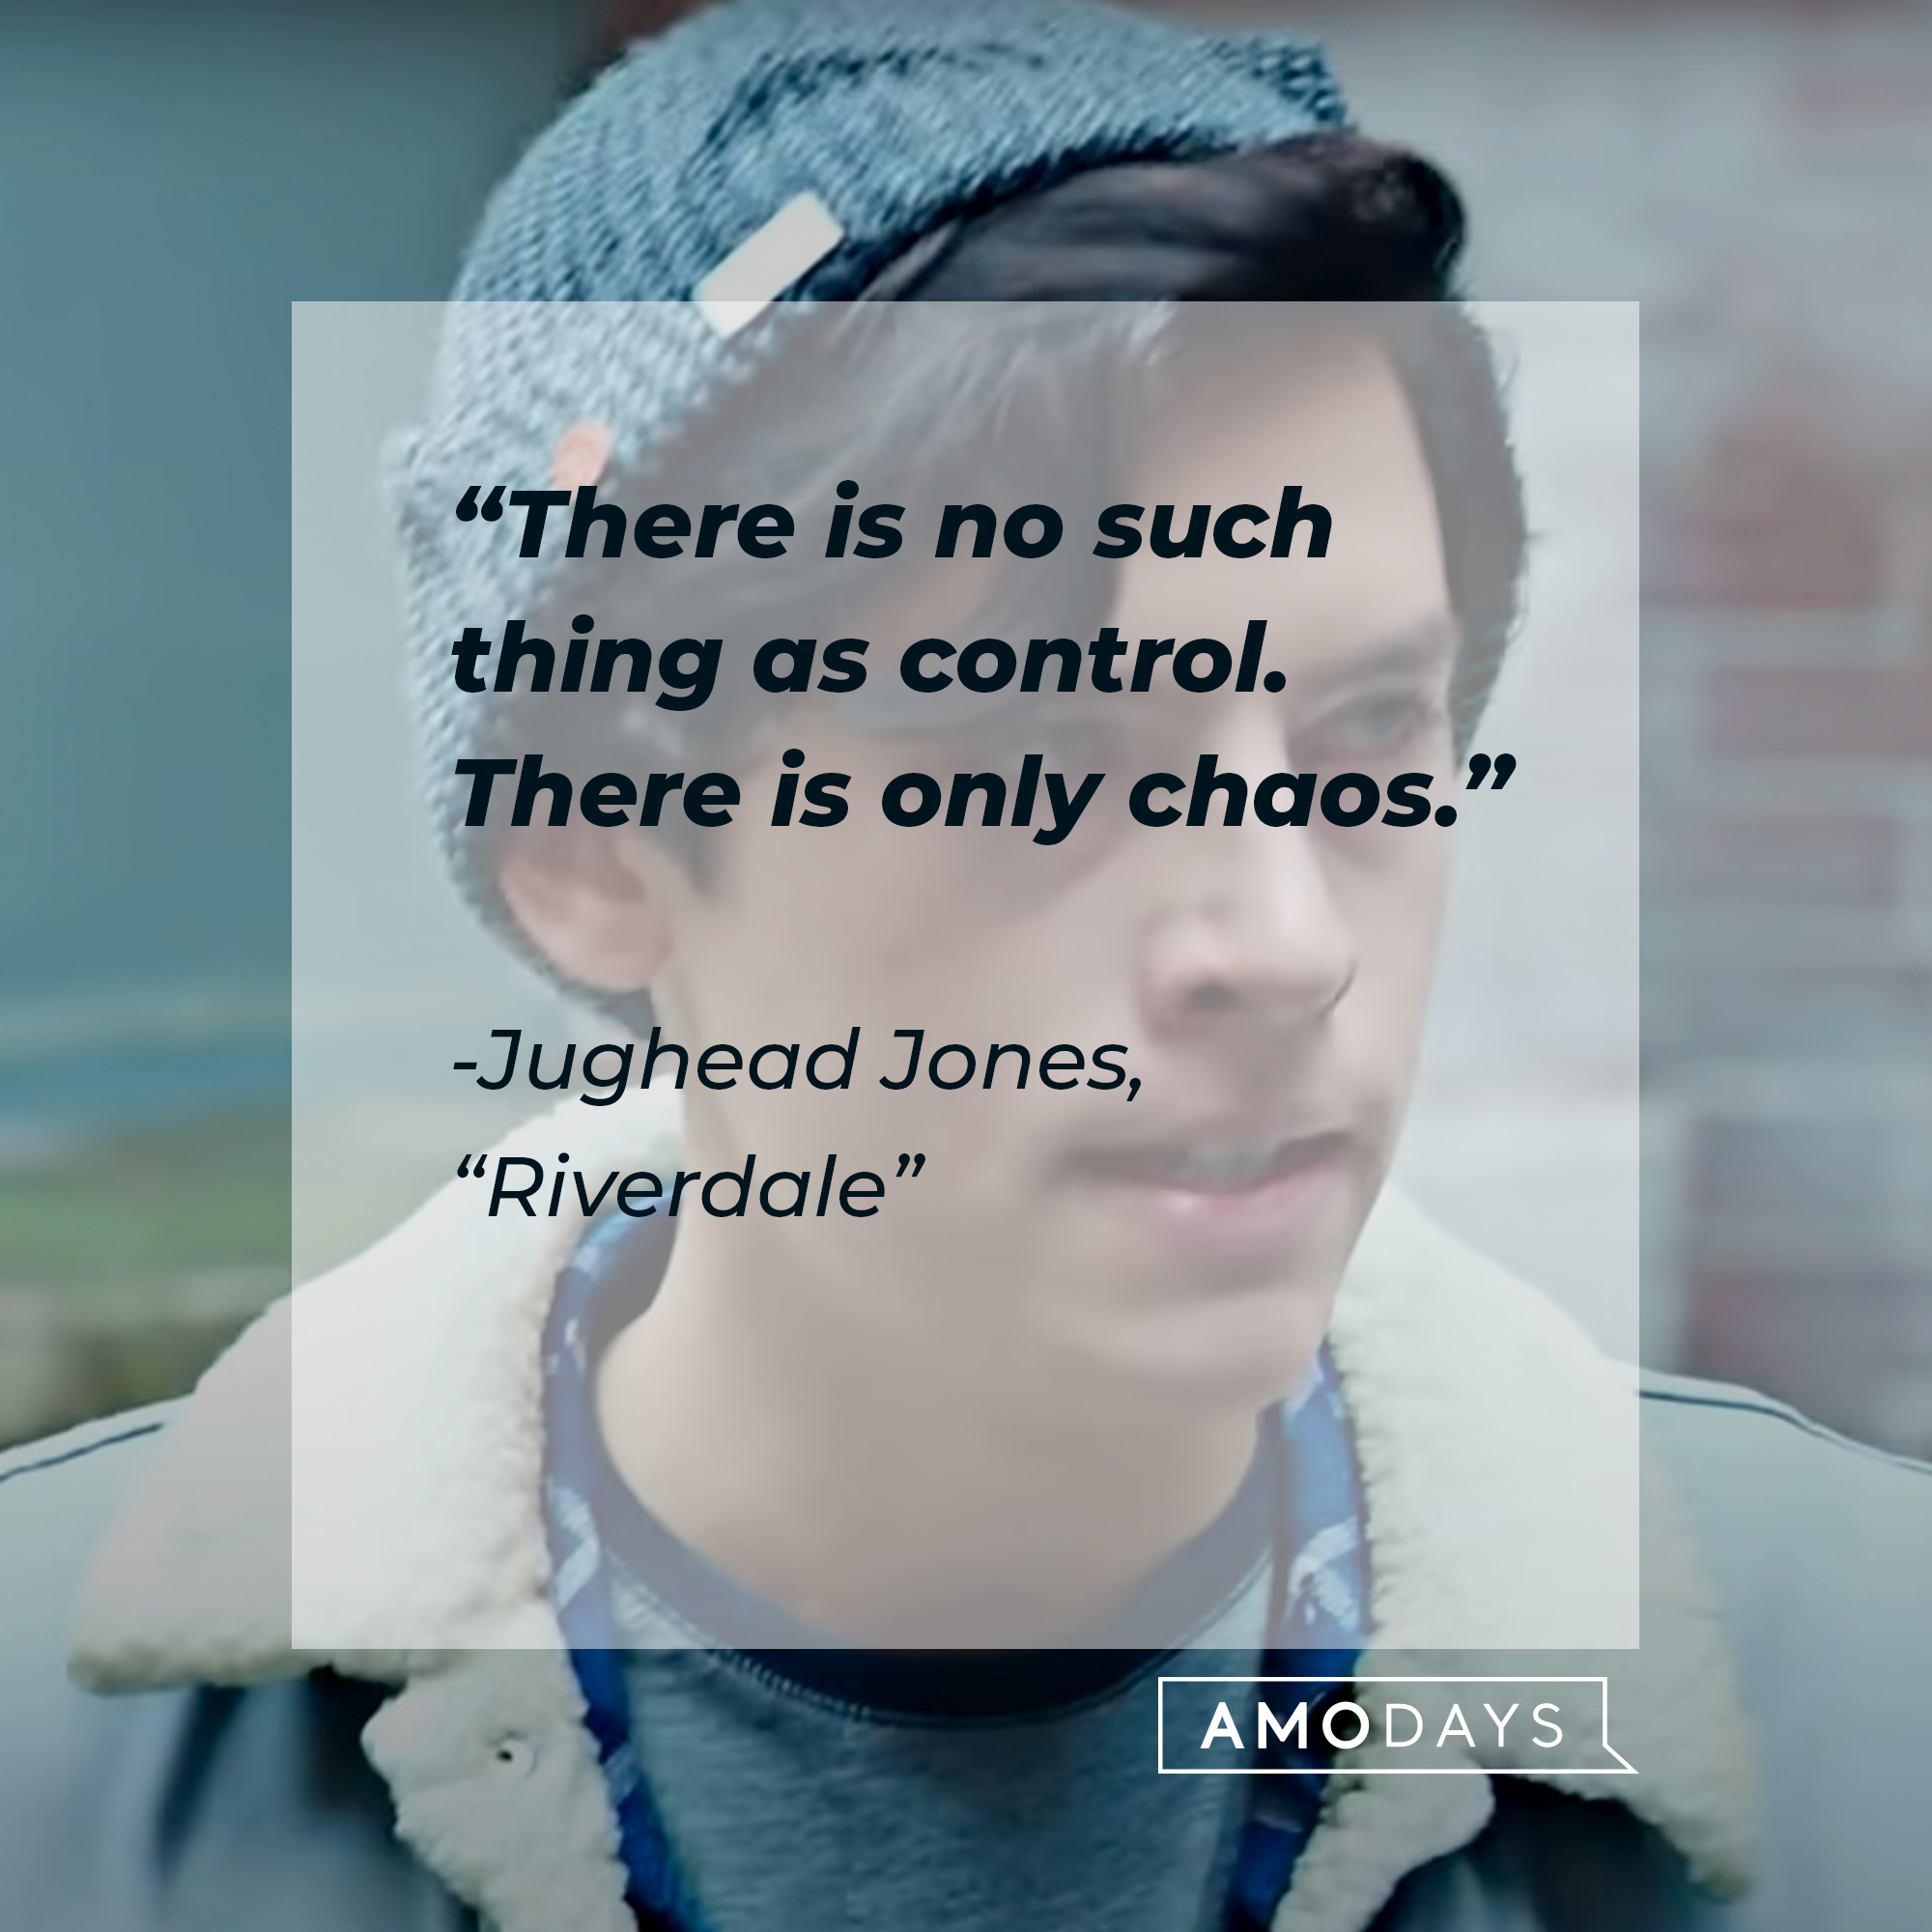 Image of Cole Sprouse as Judhead Jones in "Riverdale" with the quote: “There is no such thing as control. There is only chaos.” | Source: facebook.com/Riverdale